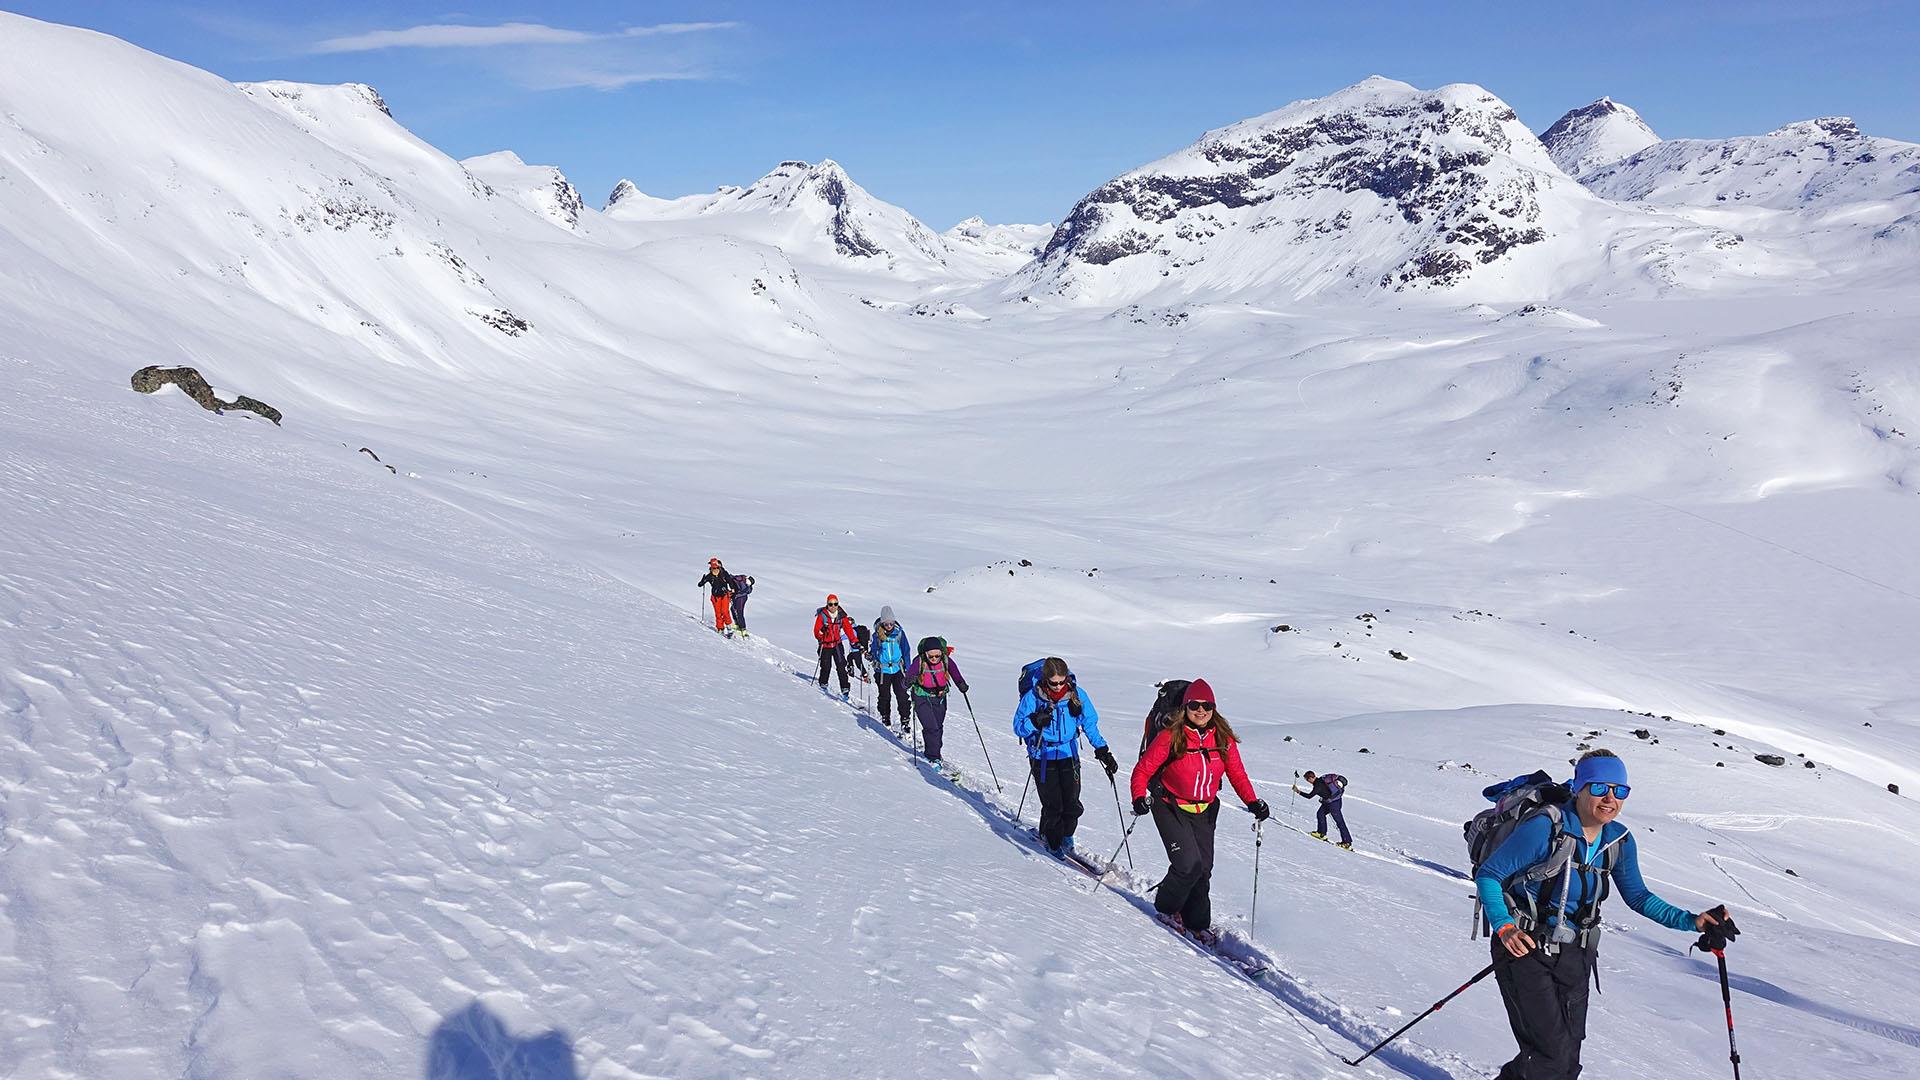 A group og randonnee skiers in a row zig-zagging up a mountain side with high mountains in the background